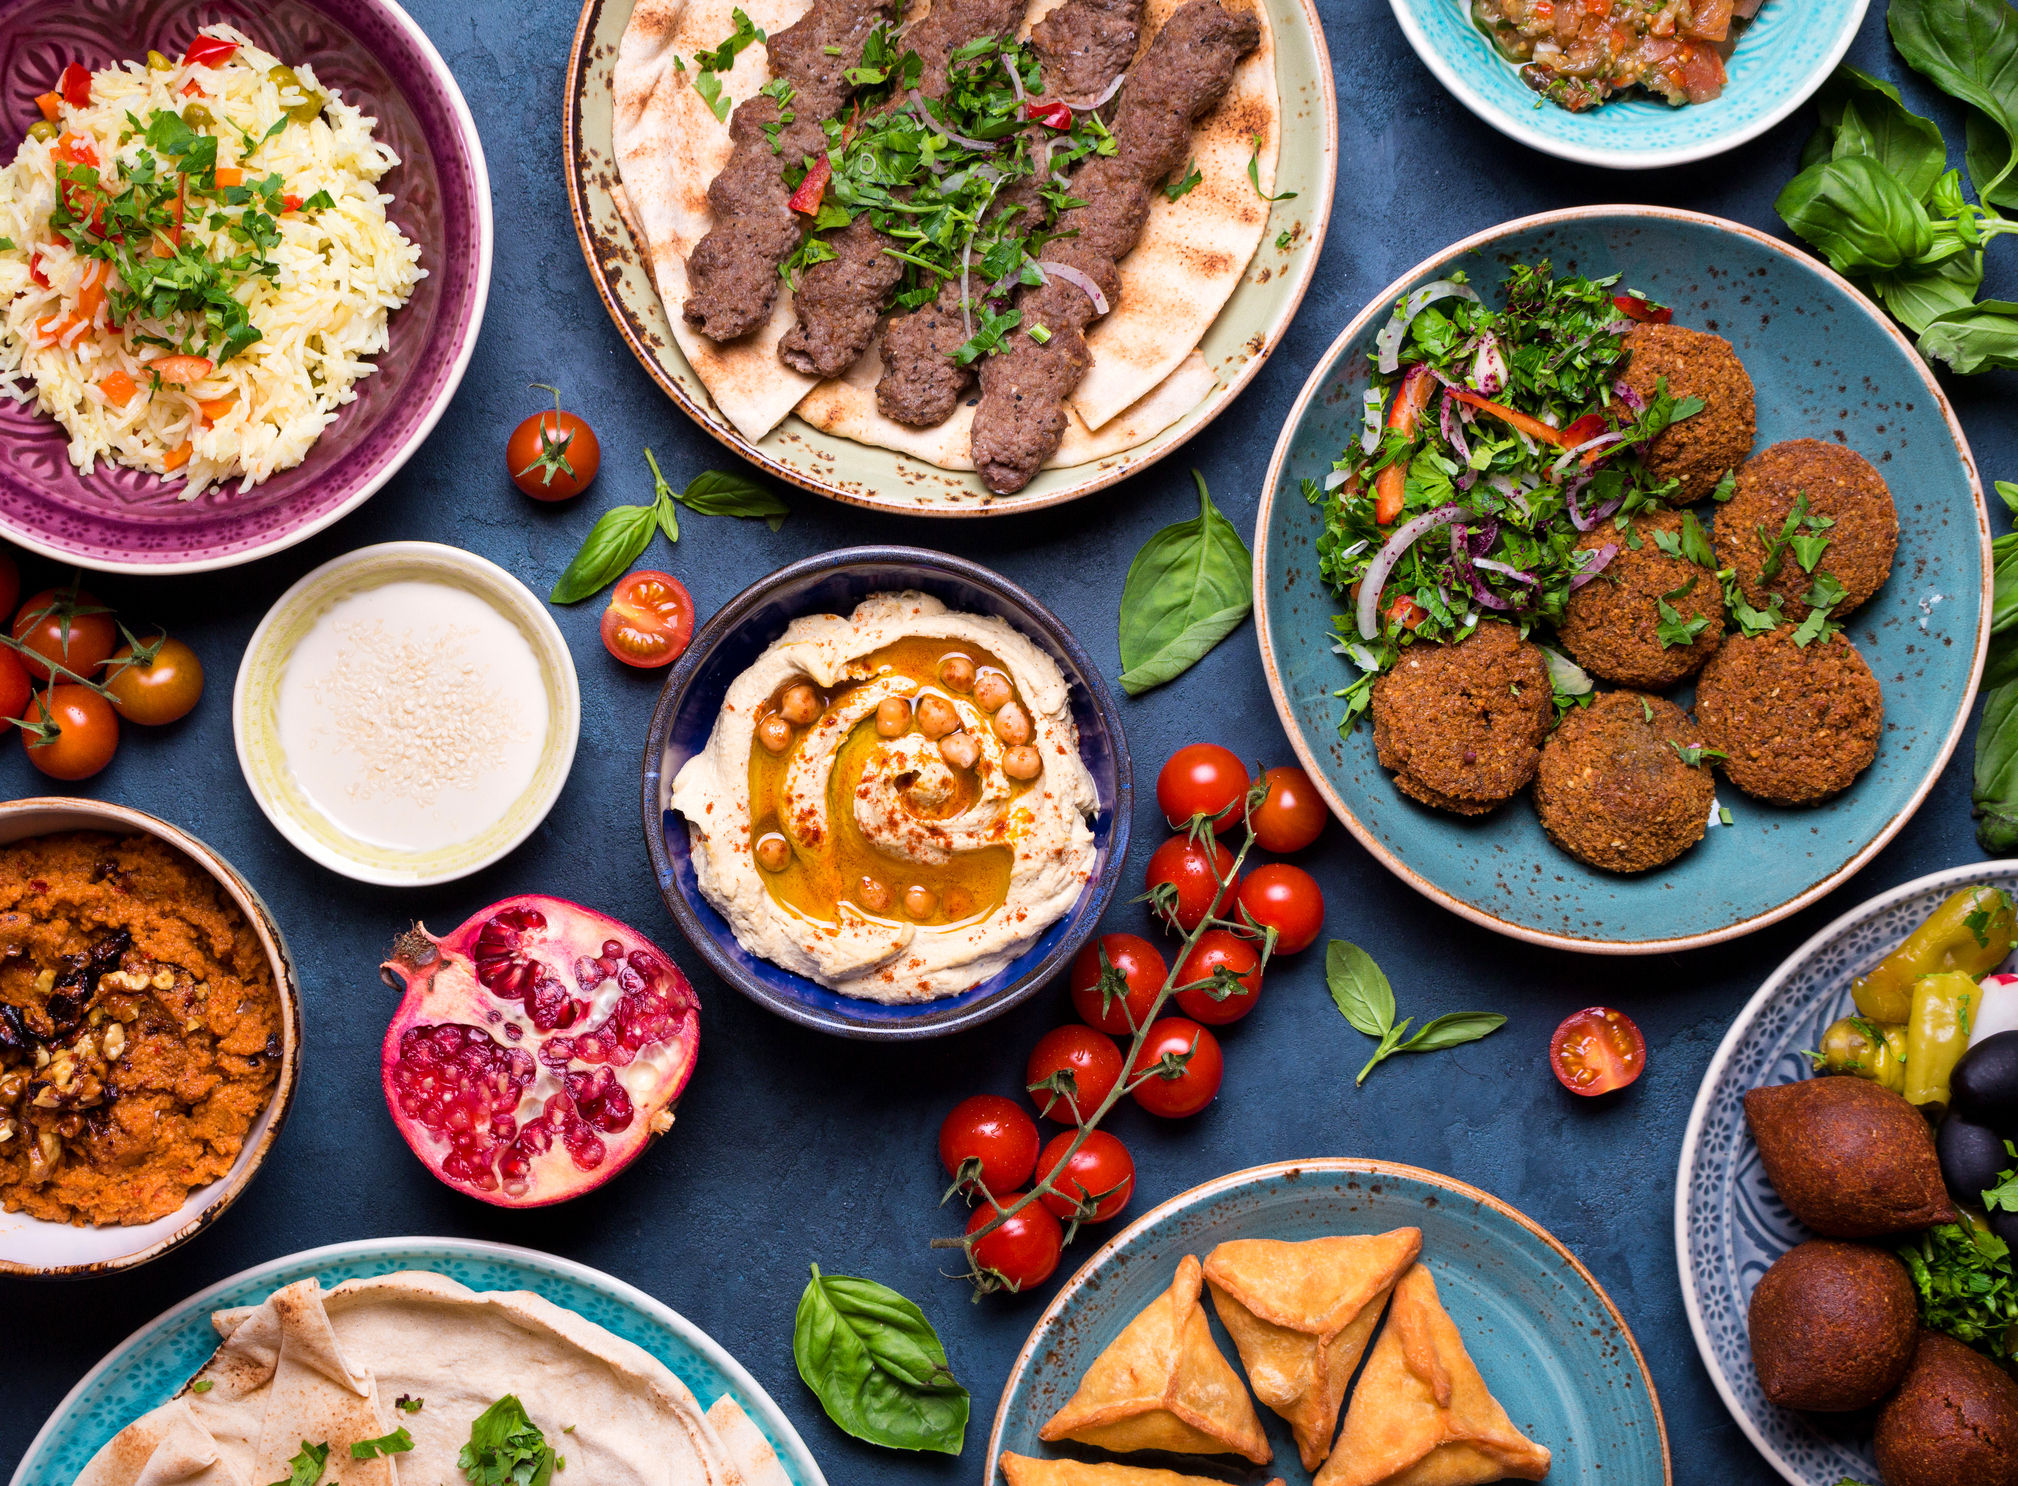 15 best Middle Eastern restaurants in KL to check out now